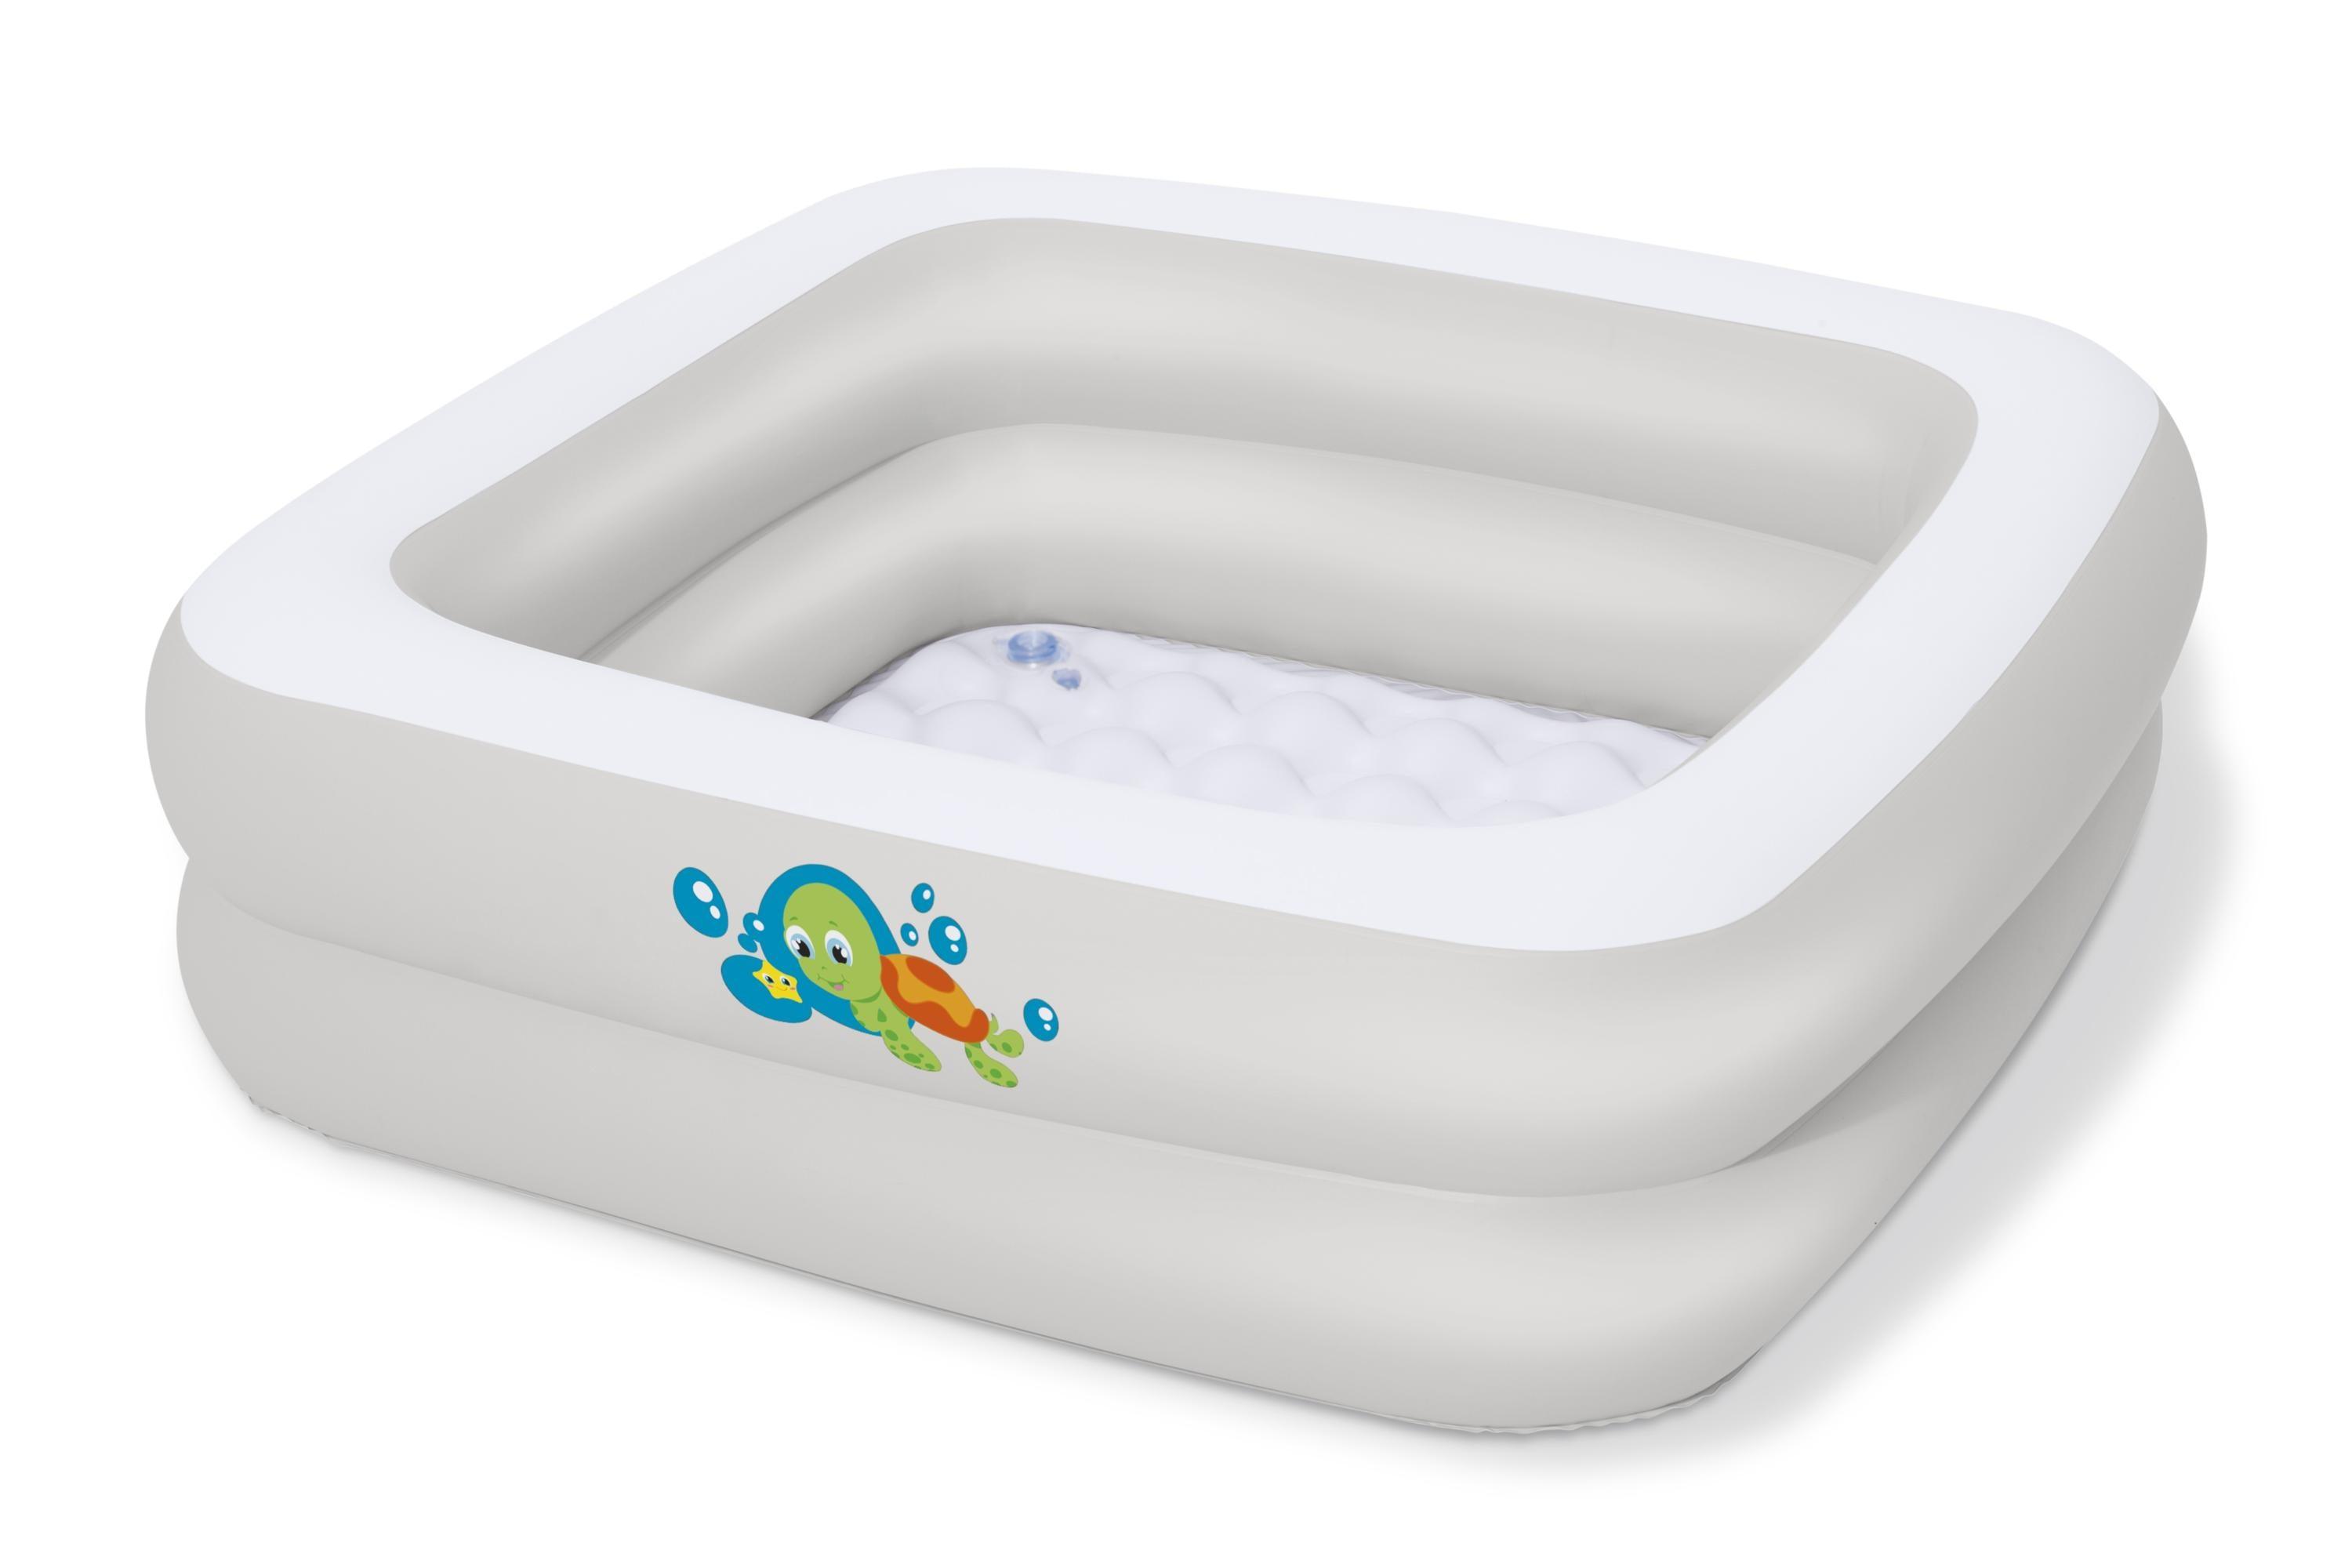 Up, In & Over baby shower tray, 86 x 25 cm - Ourkids - Bestway